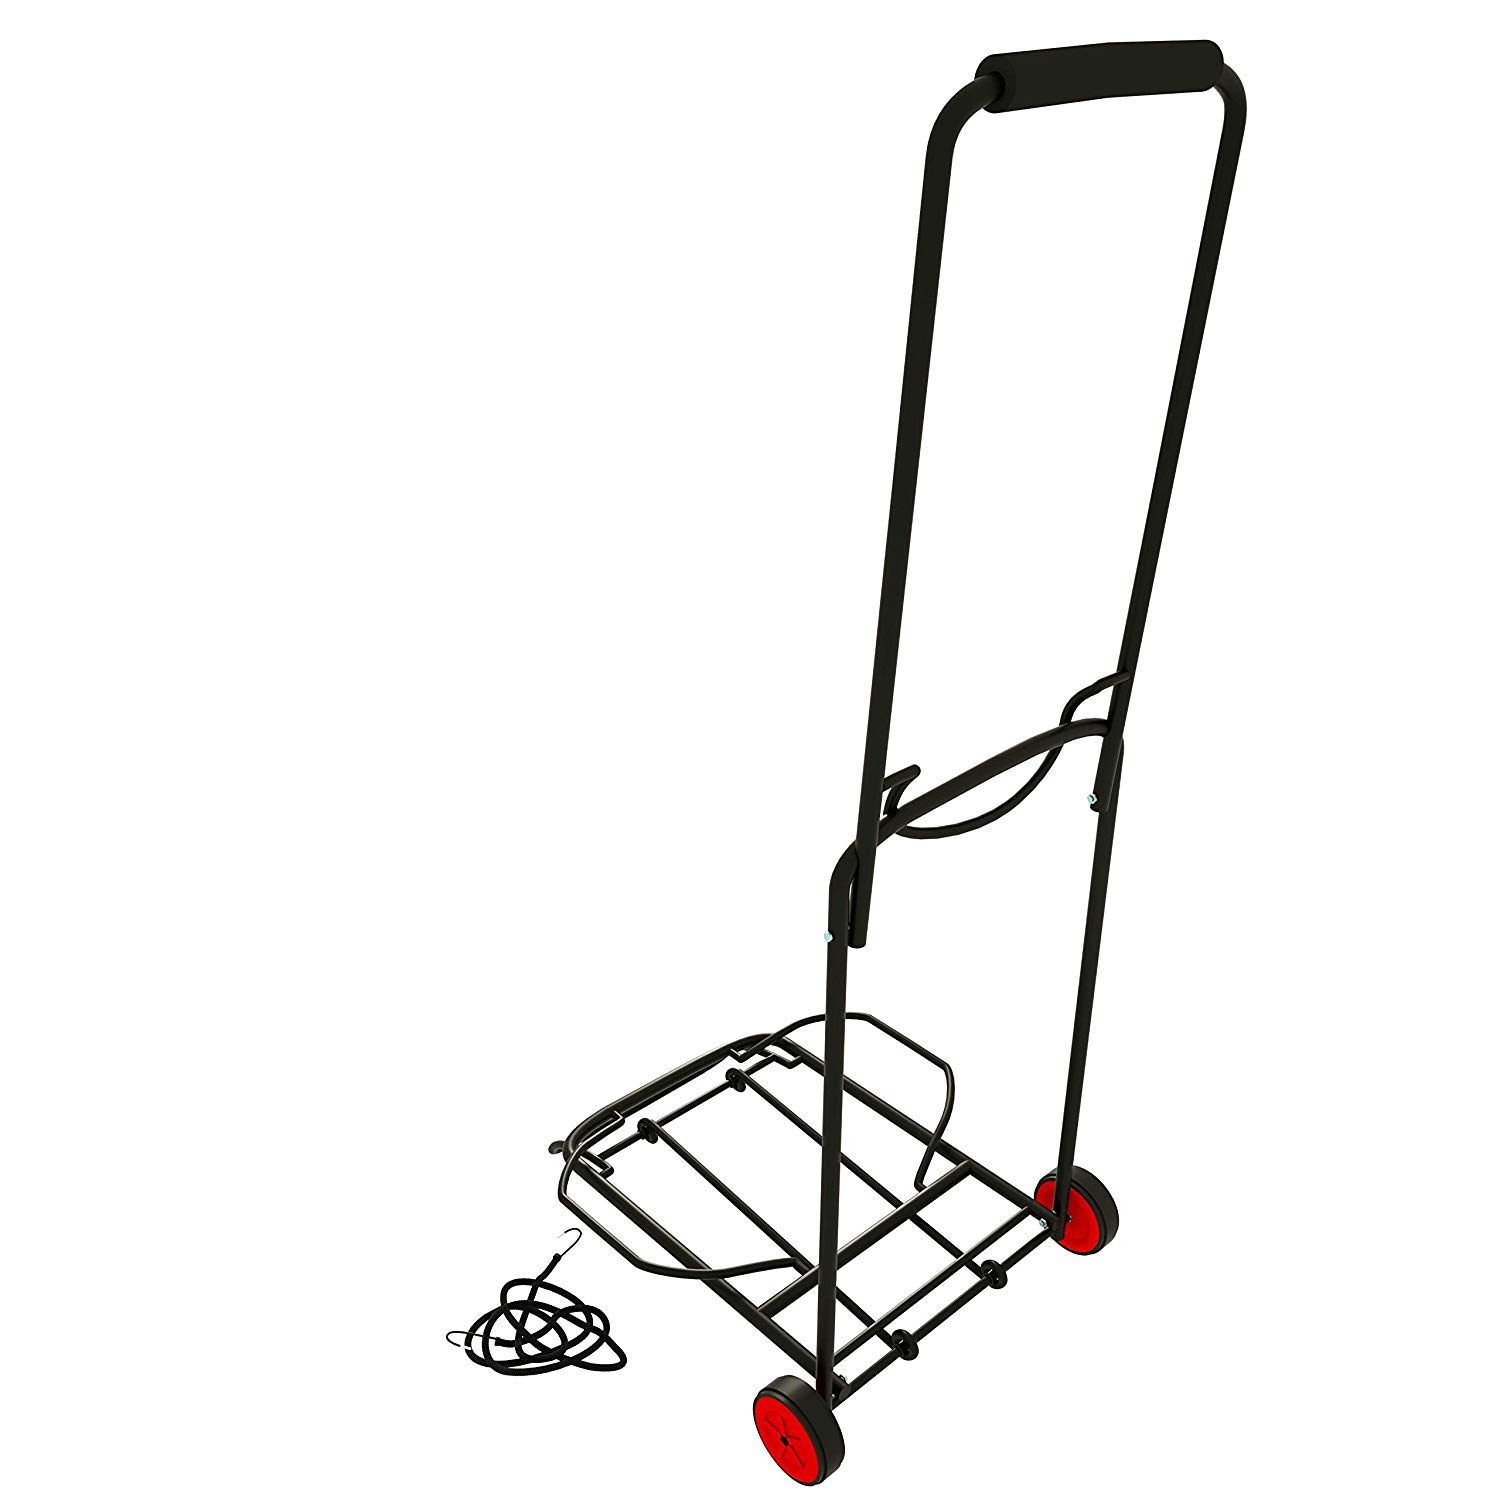 Details about   Folding Hand Truck Dolly,Heavy-Duty Luggage Cart with Telescoping Handle,165 LB 